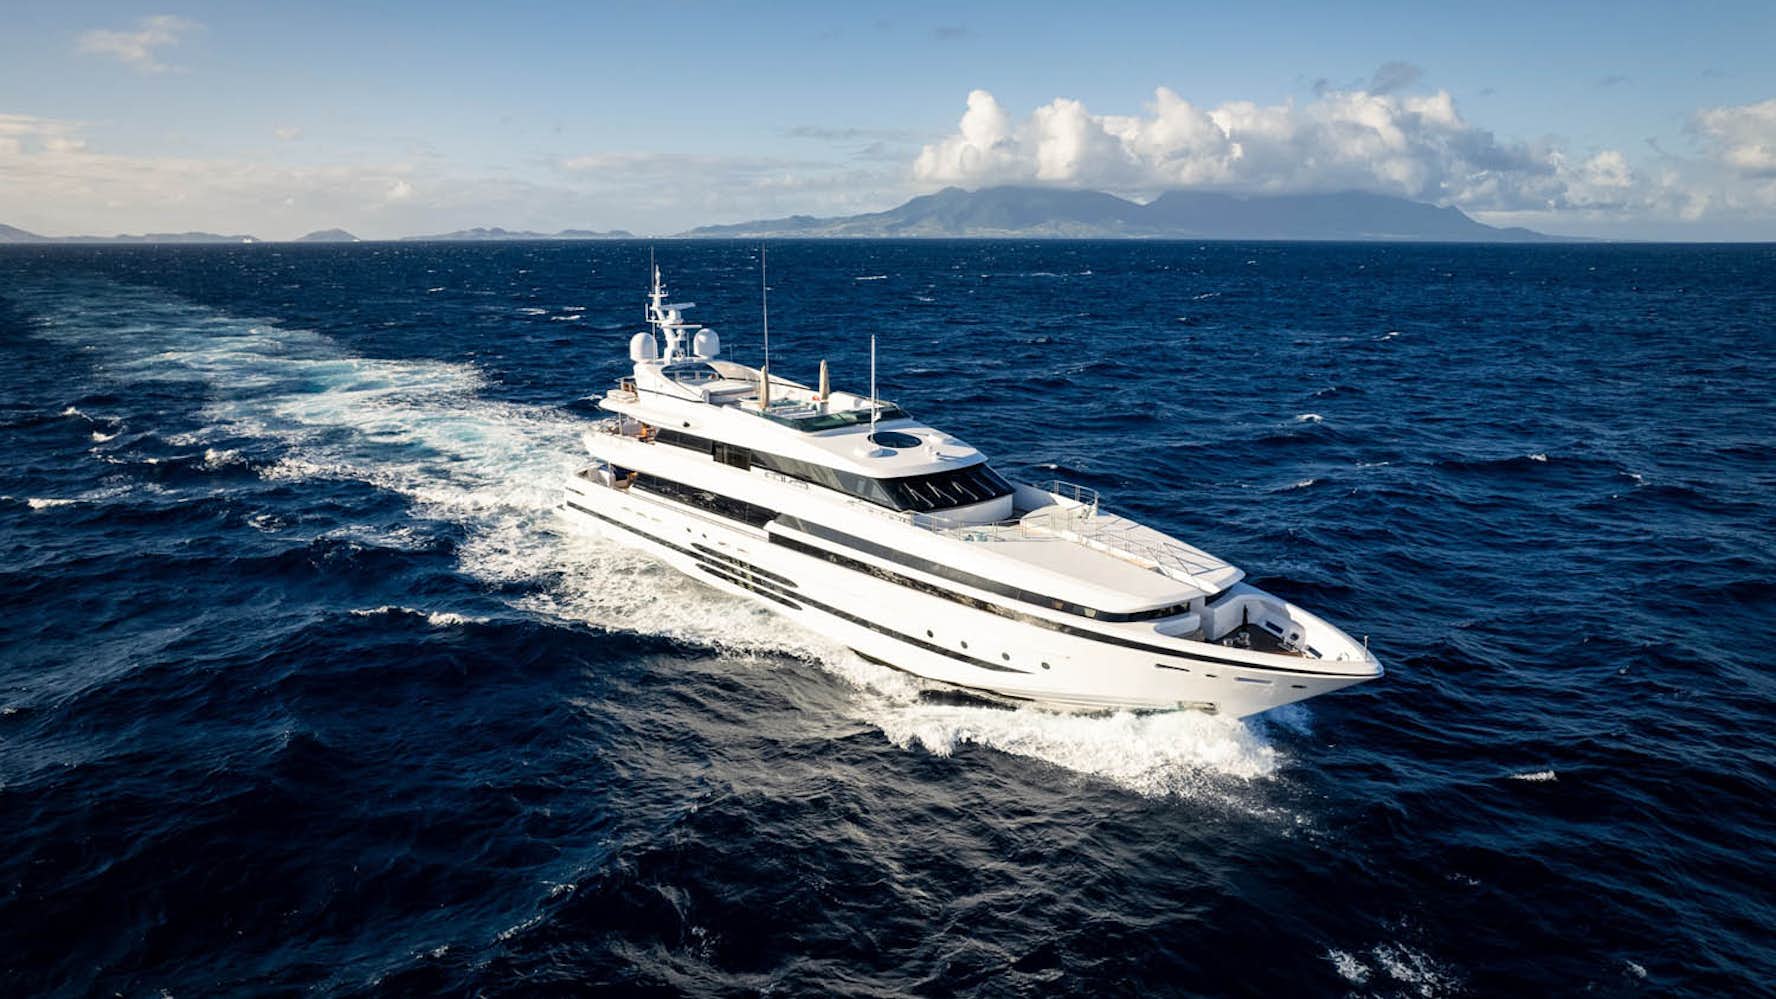 Watch Video for BALISTA Yacht for Charter